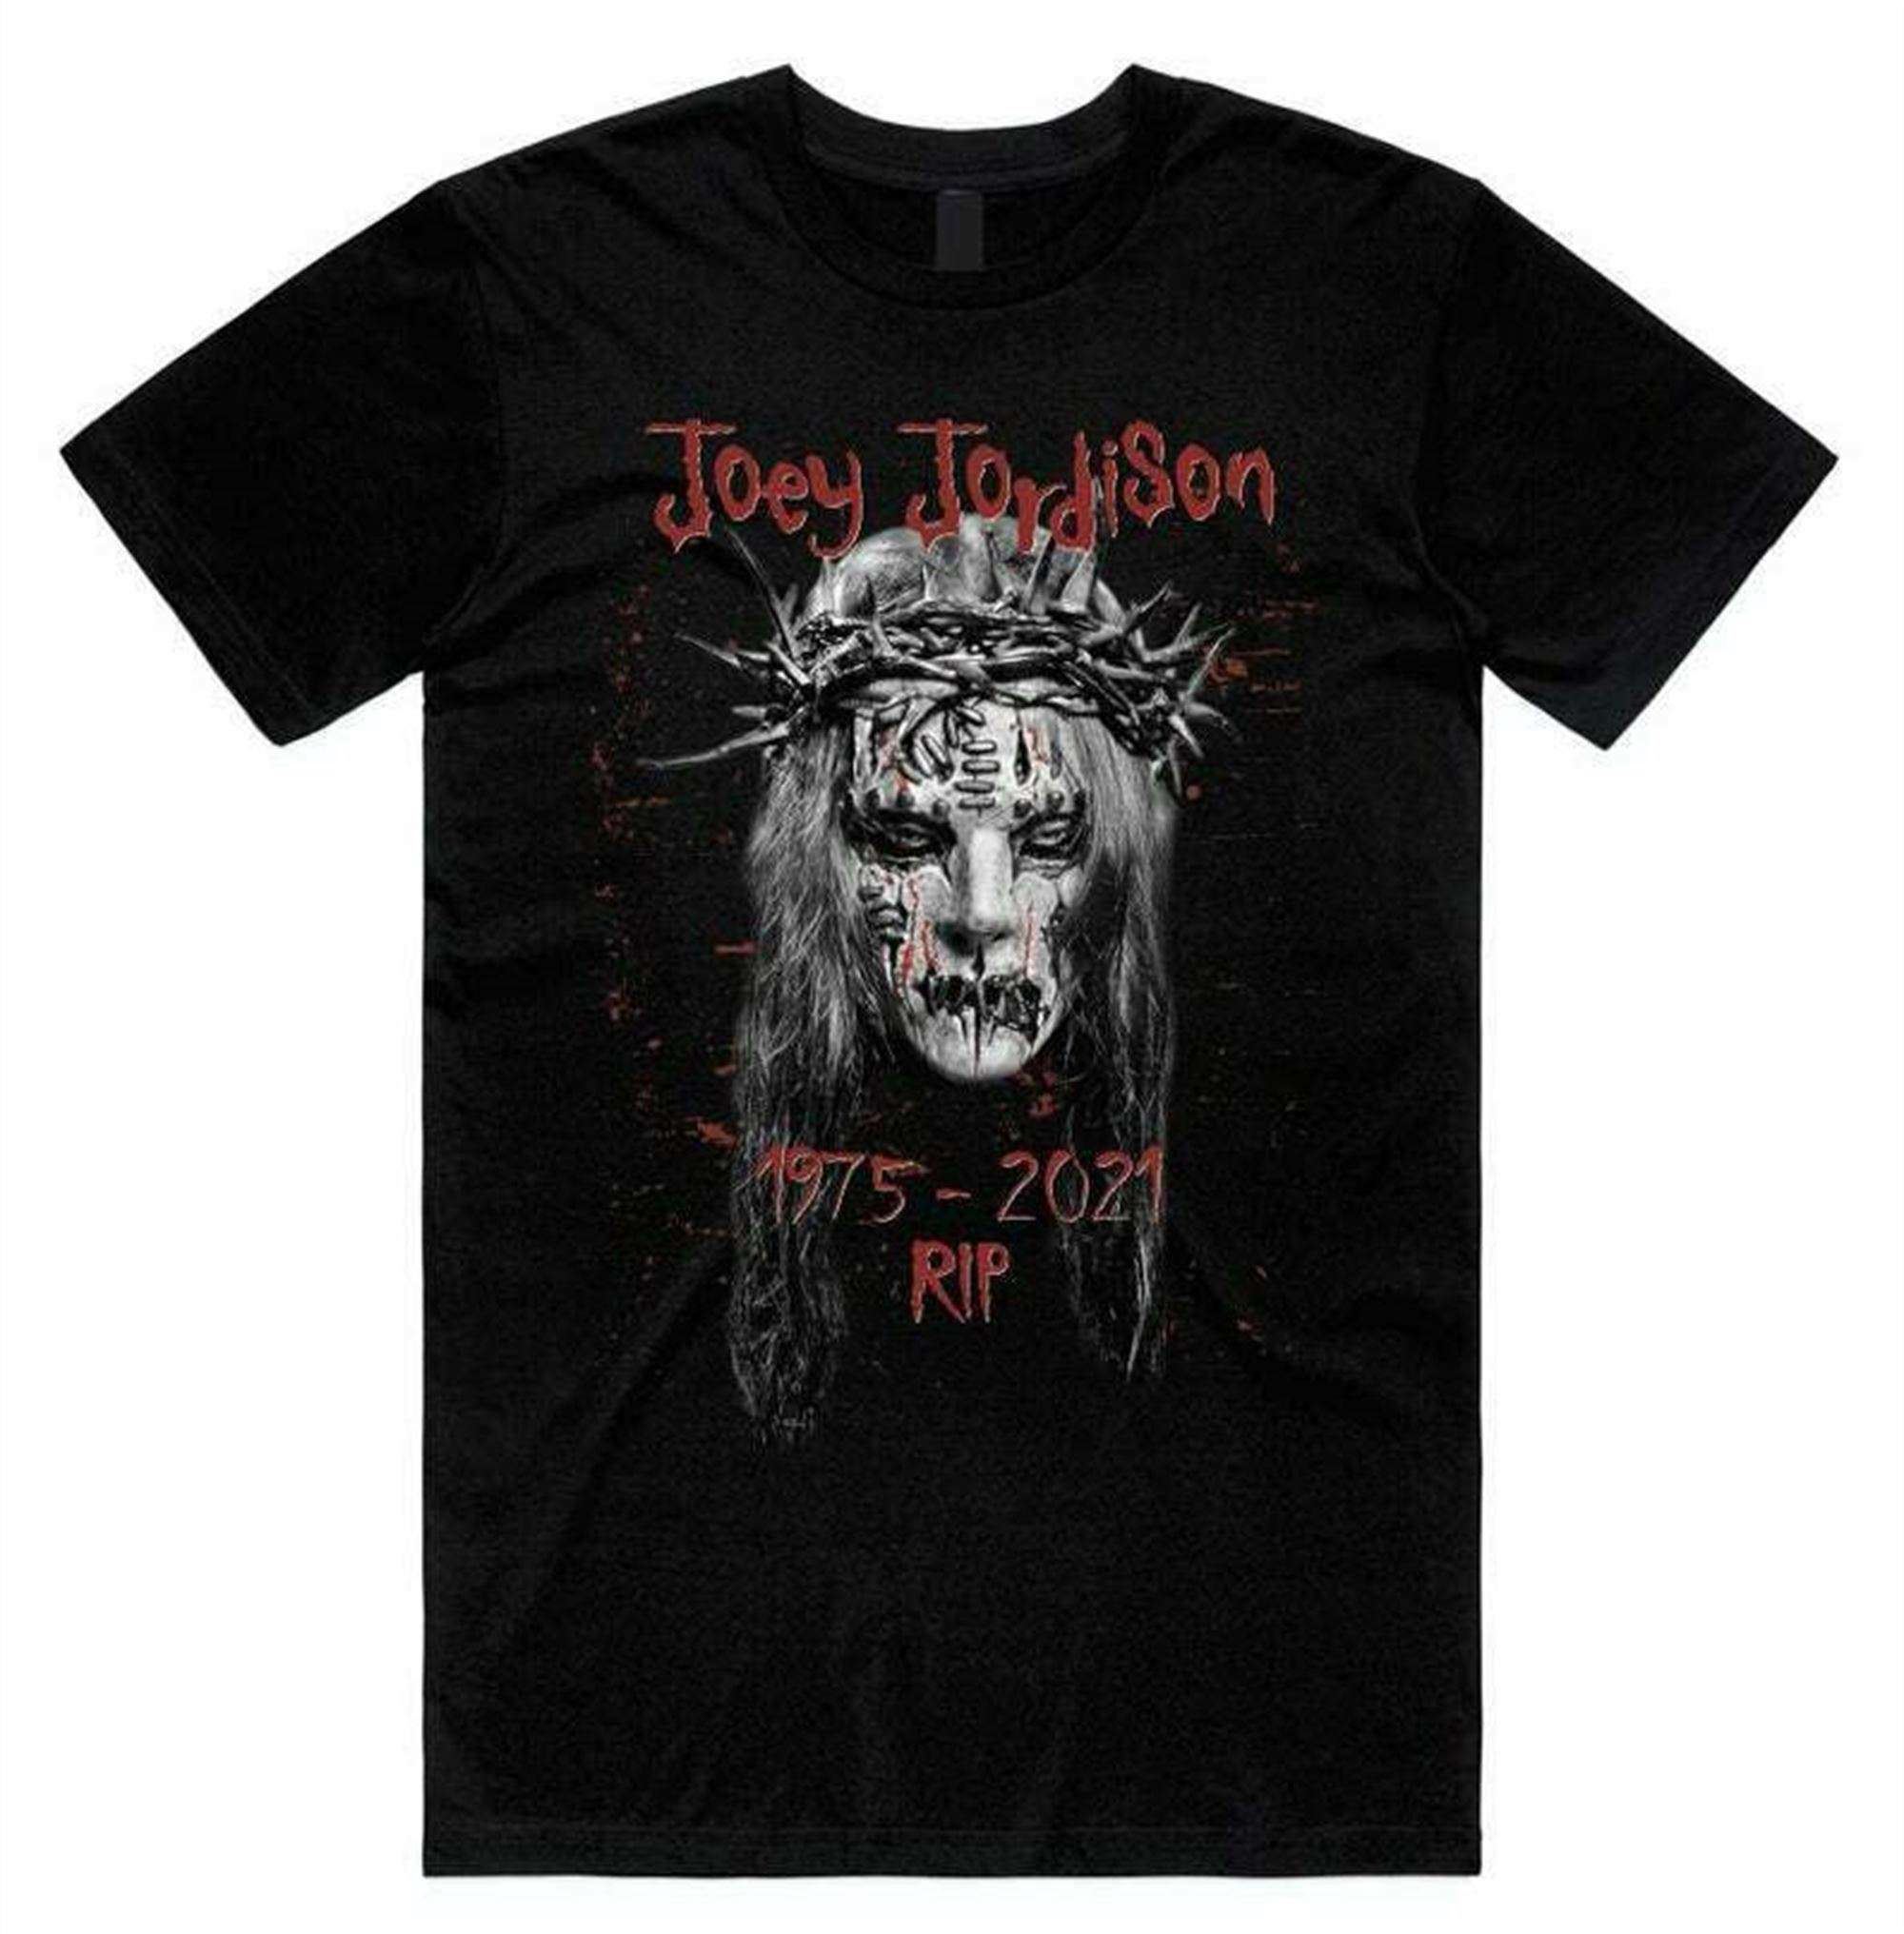 Rip Joey Jordison 1975-2021 T Shirt Full Size Up To 5xl